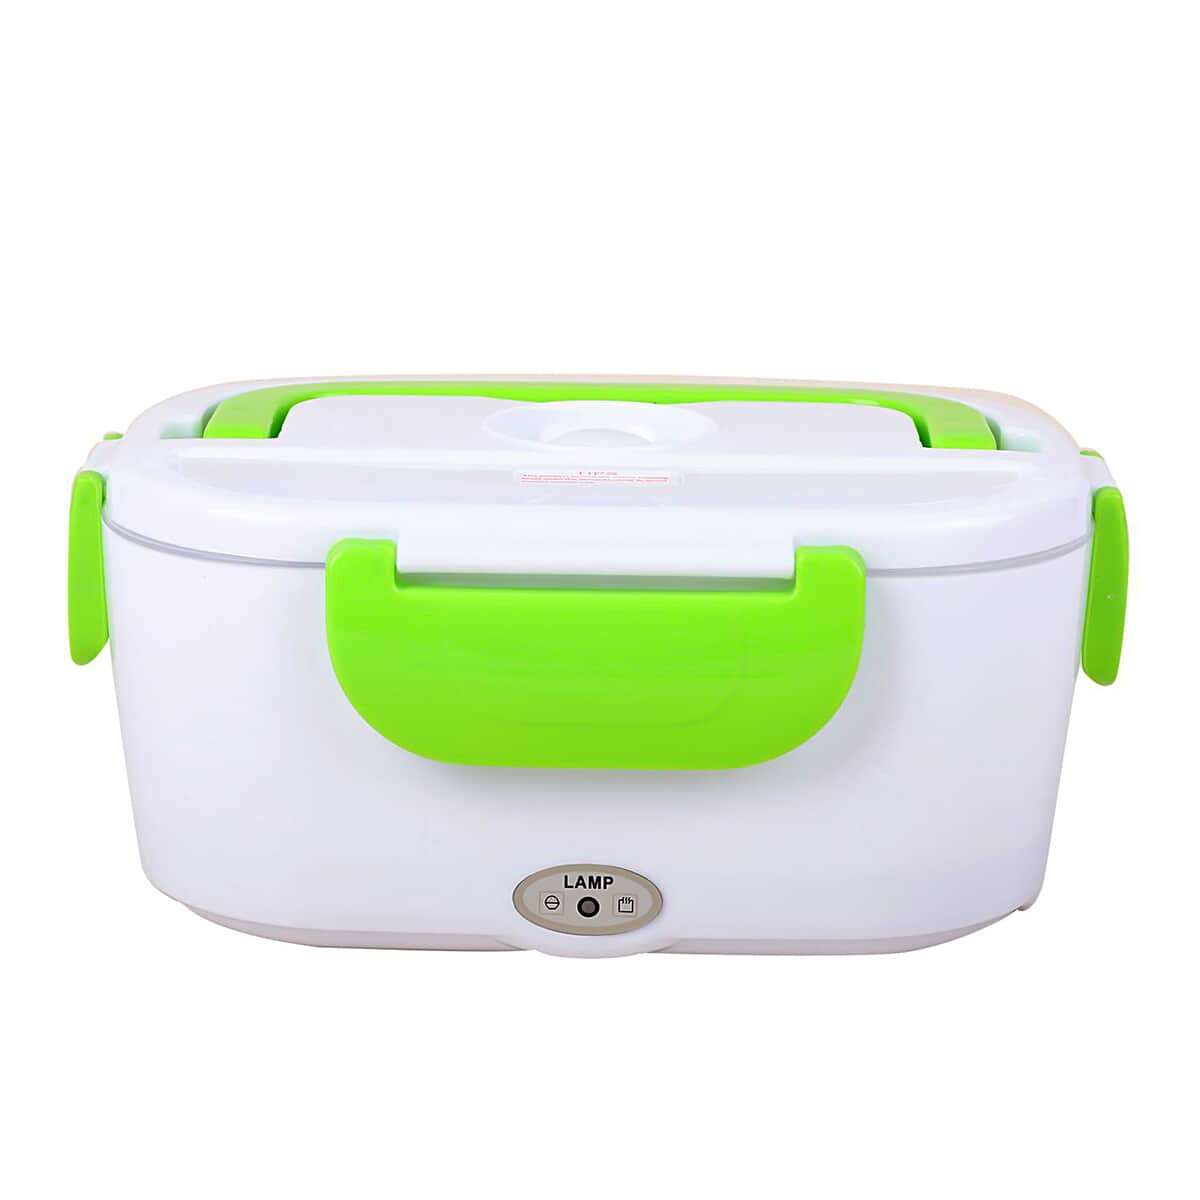 Shop LC Thermoplastic Polymer White Blue Portable Electric Heating Lunch Box